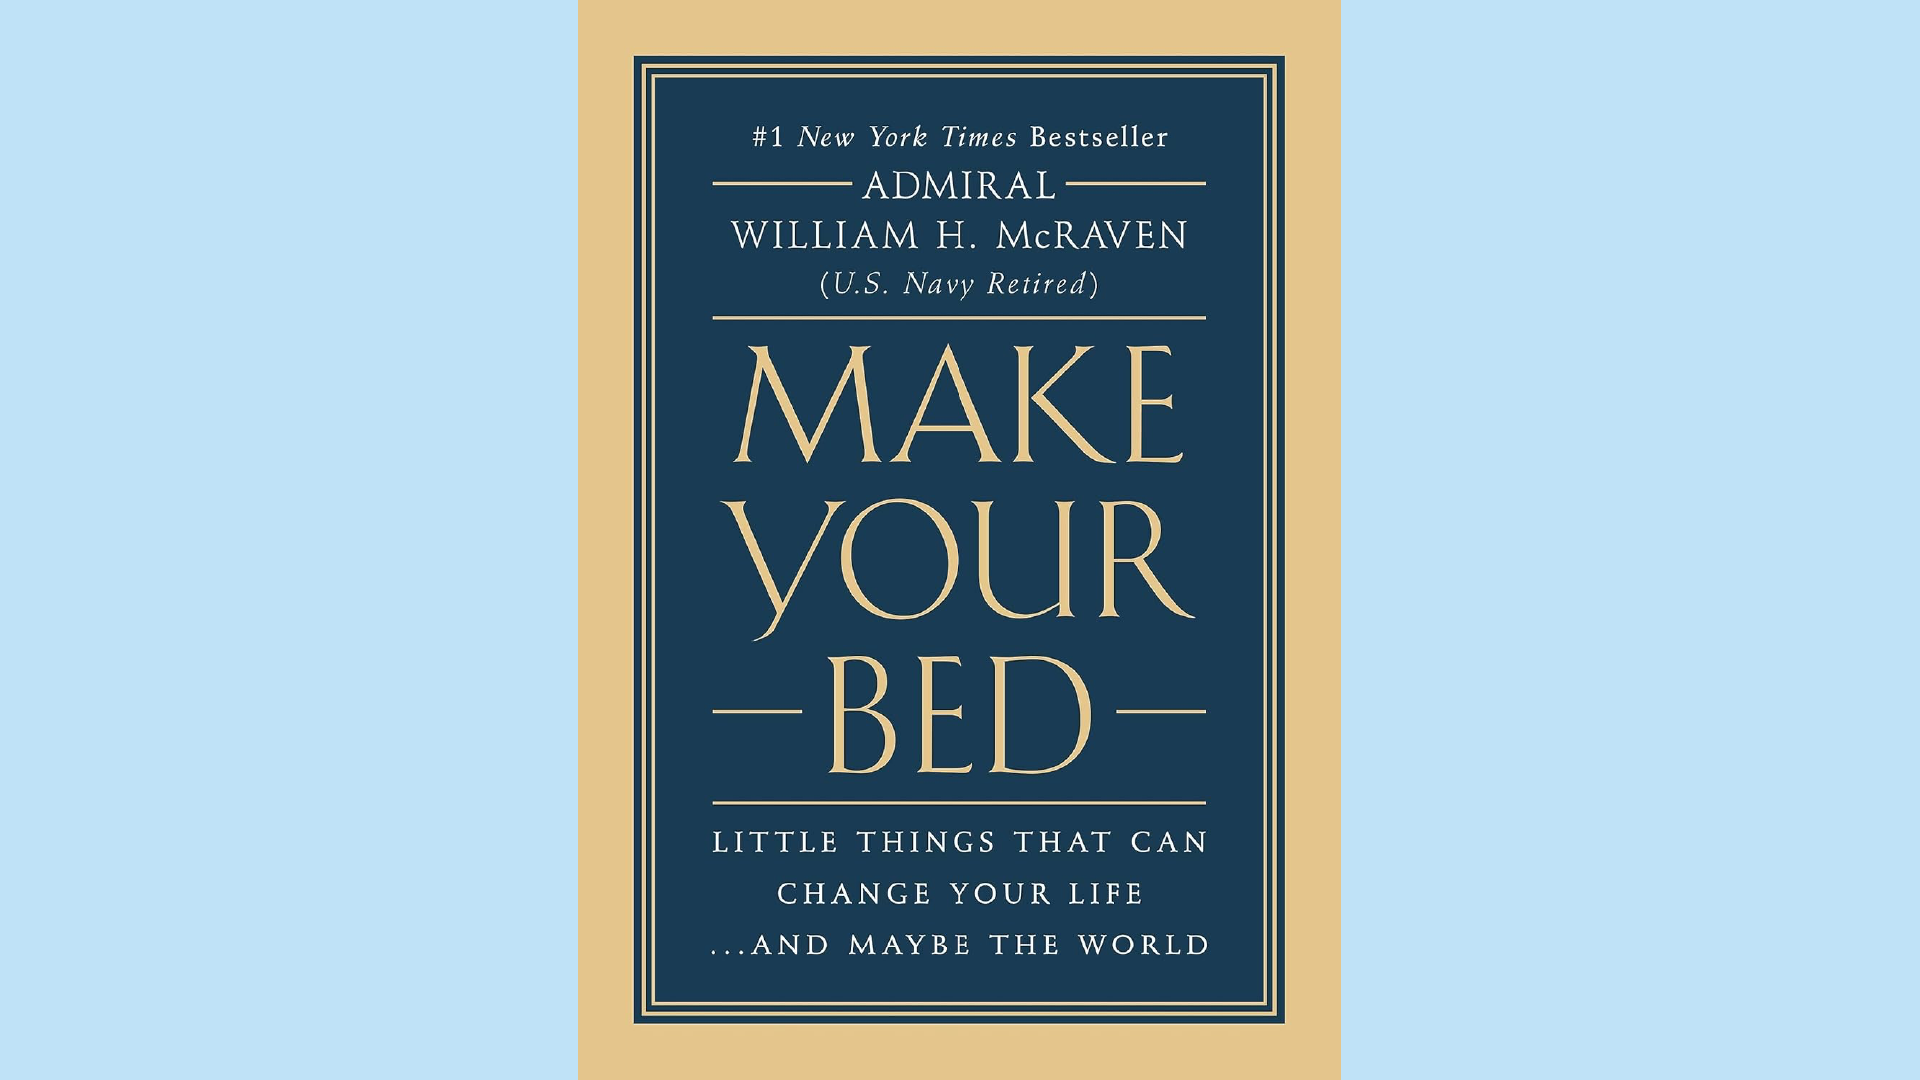 Summary: Make Your Bed: Little Things That Can Change Your Life...And Maybe the World by Admiral William H. McRaven